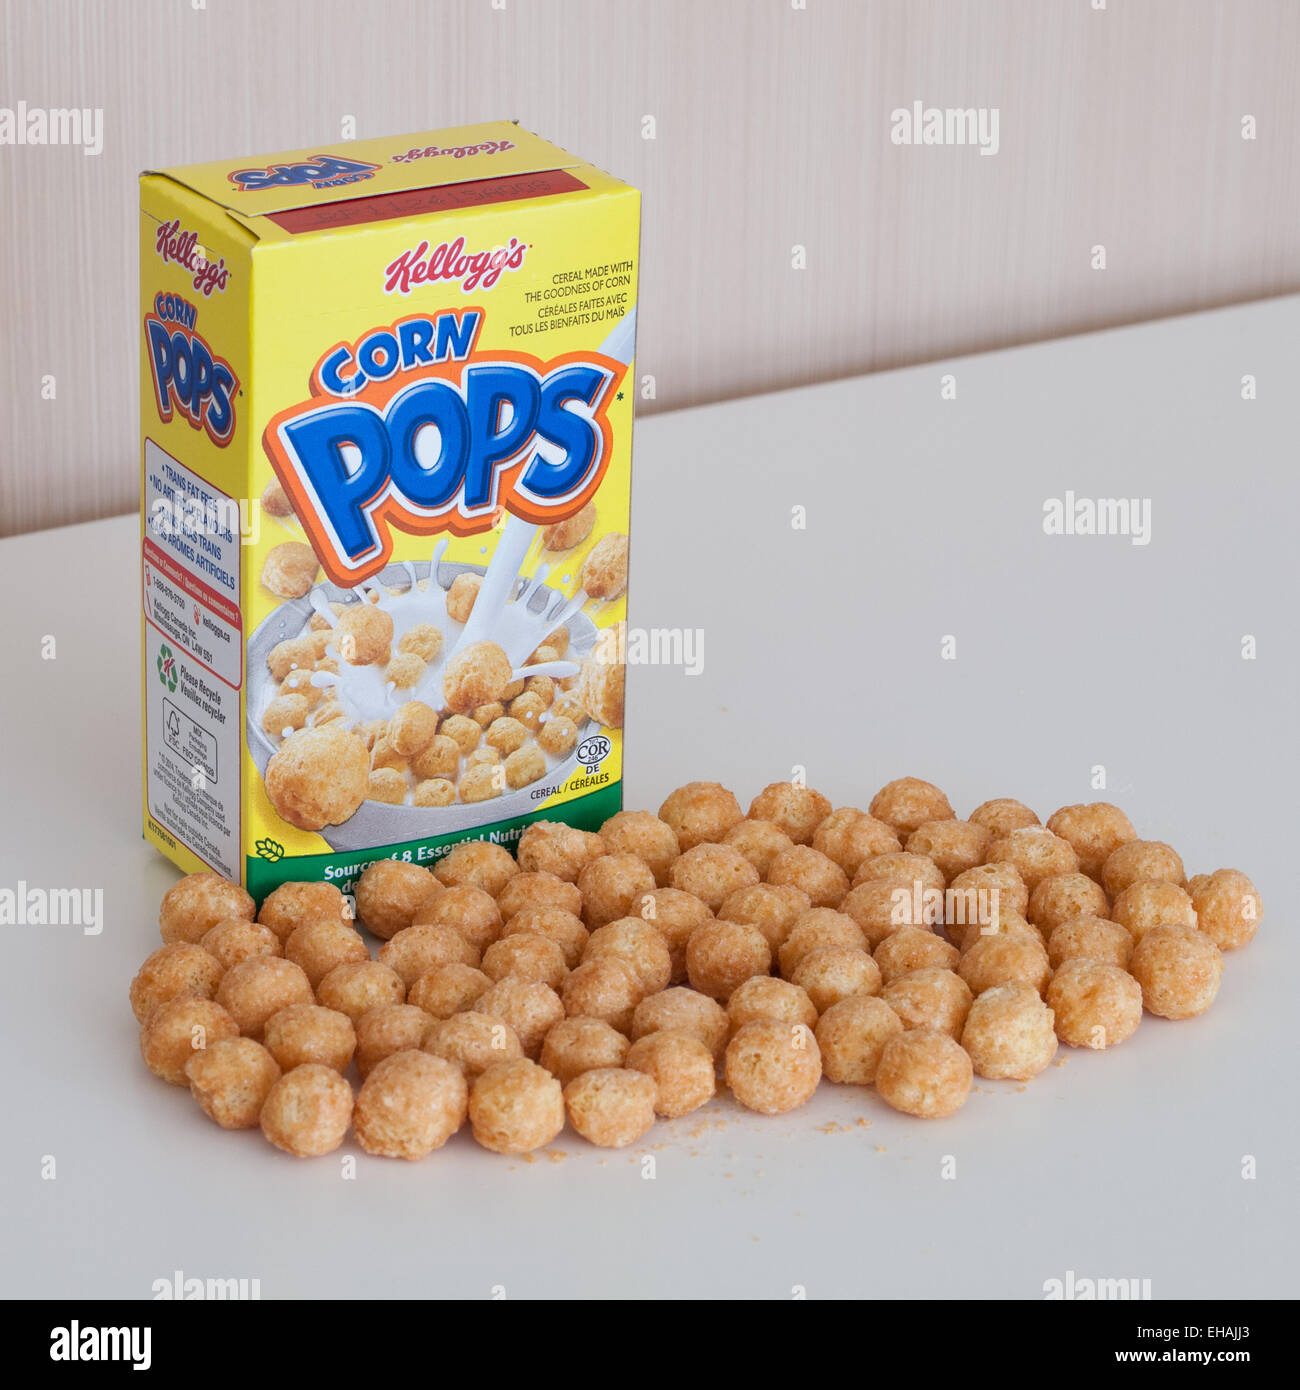 A fun-sized box of Kellogg's Corn Pops cereal. Canadian version shown Stock  Photo - Alamy